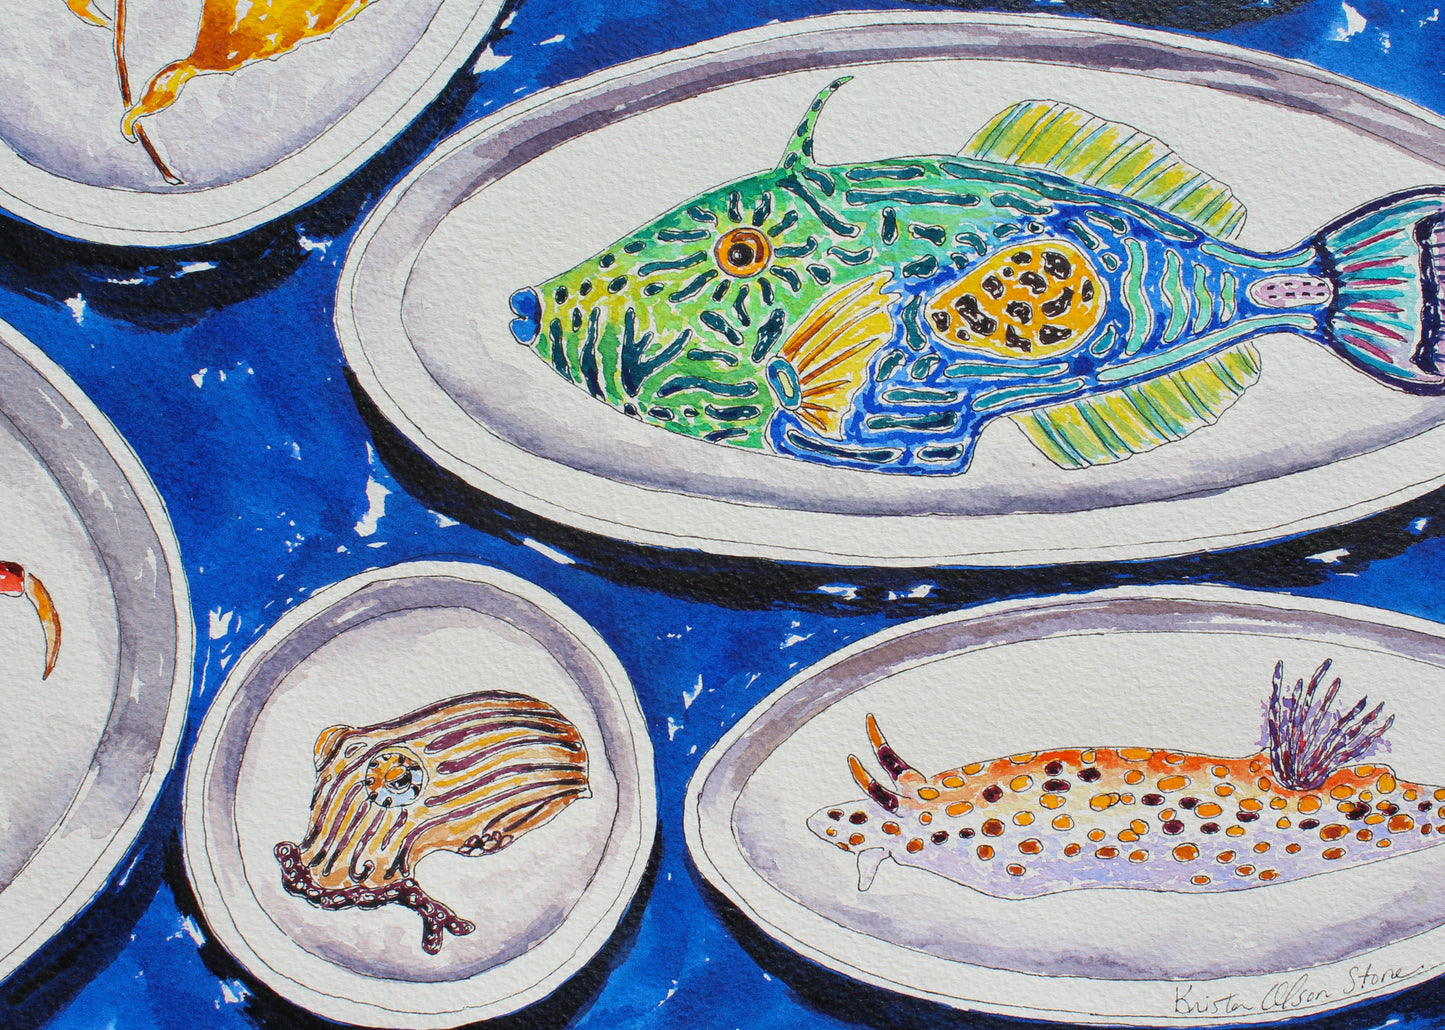 Ocean Delights, An Original 22" Square Watercolor And Ink Painting of Ceramics Decorated With Sea Life And Fish